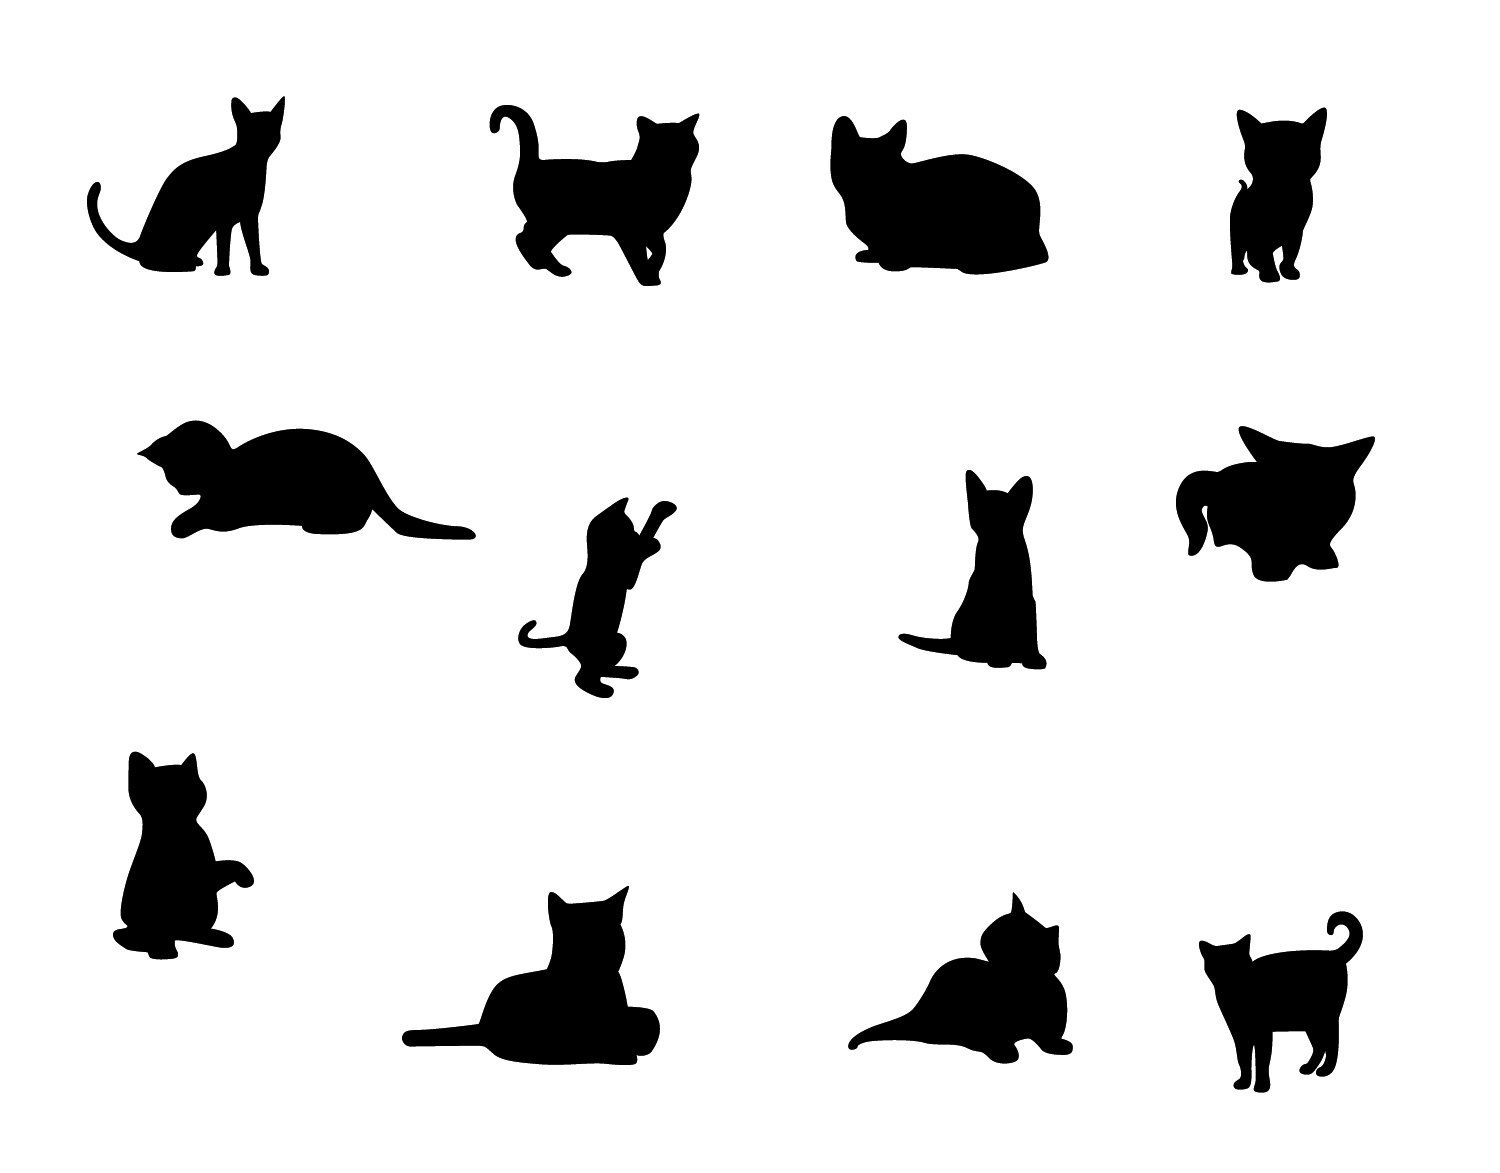 Cats Silhouettes Photoshop Brushes